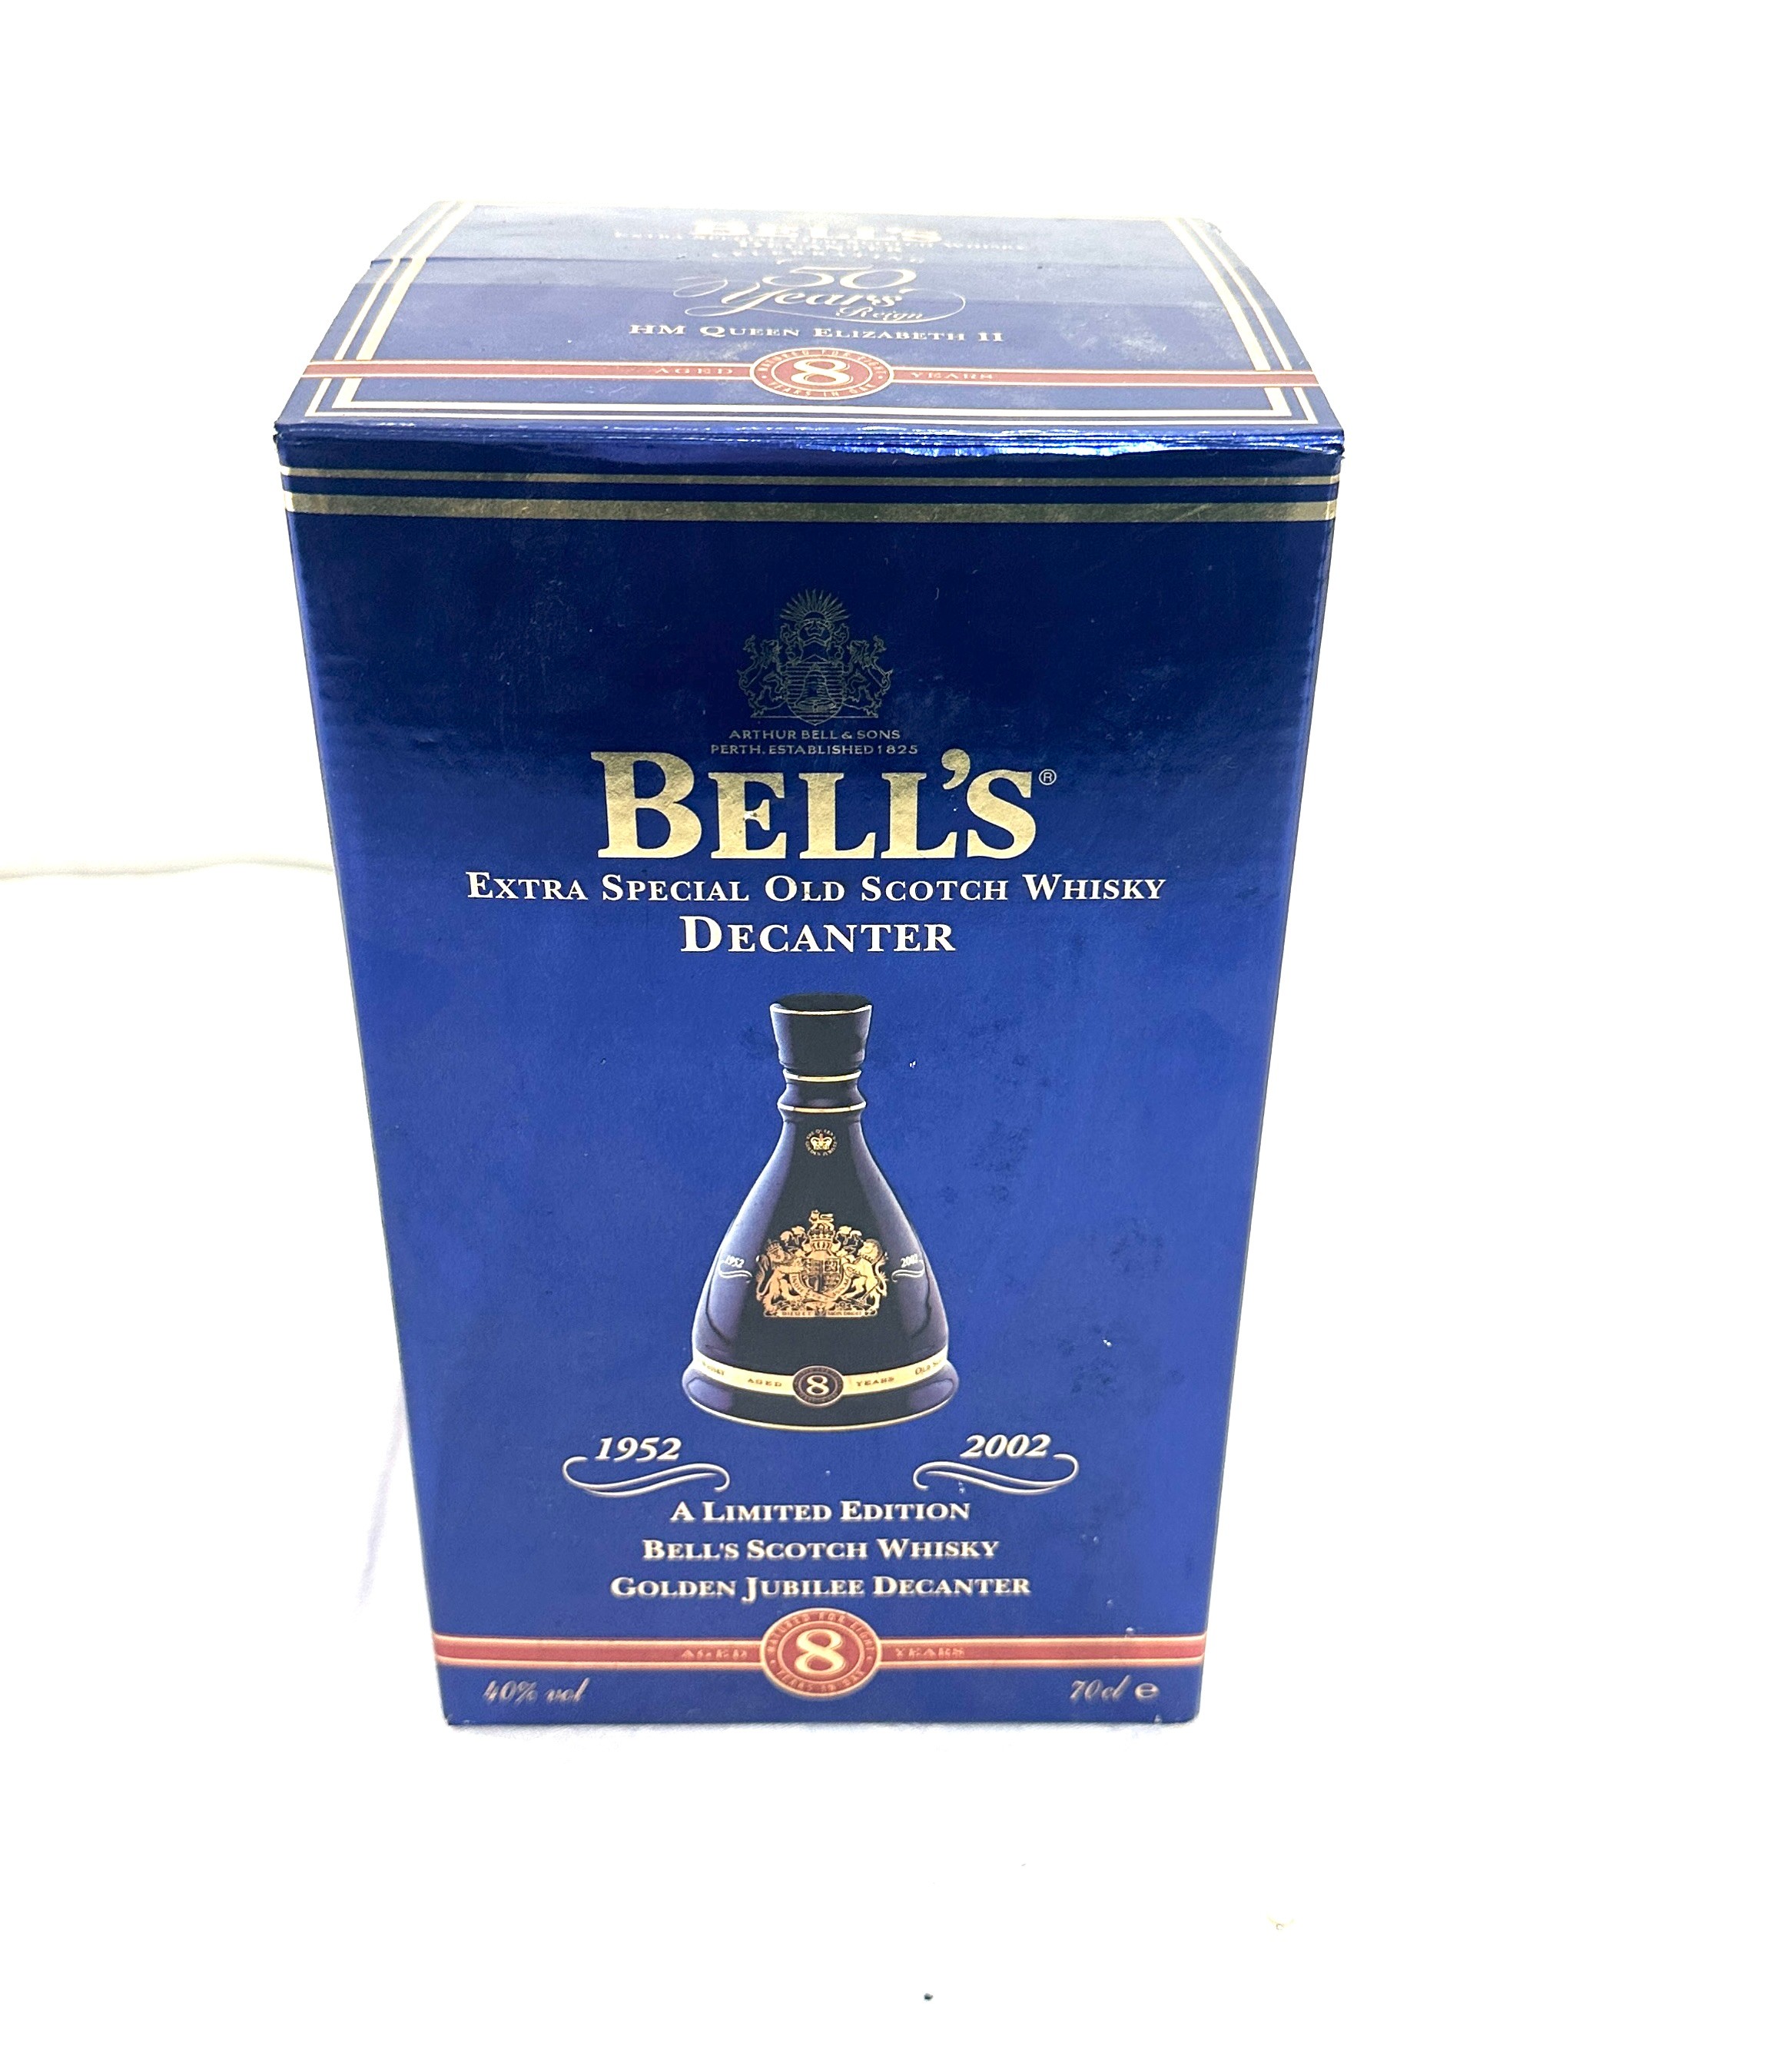 Bell's Celebrating 50 Years Reign HM Queen Elizabeth II Extra special old Scotch whisky decanter